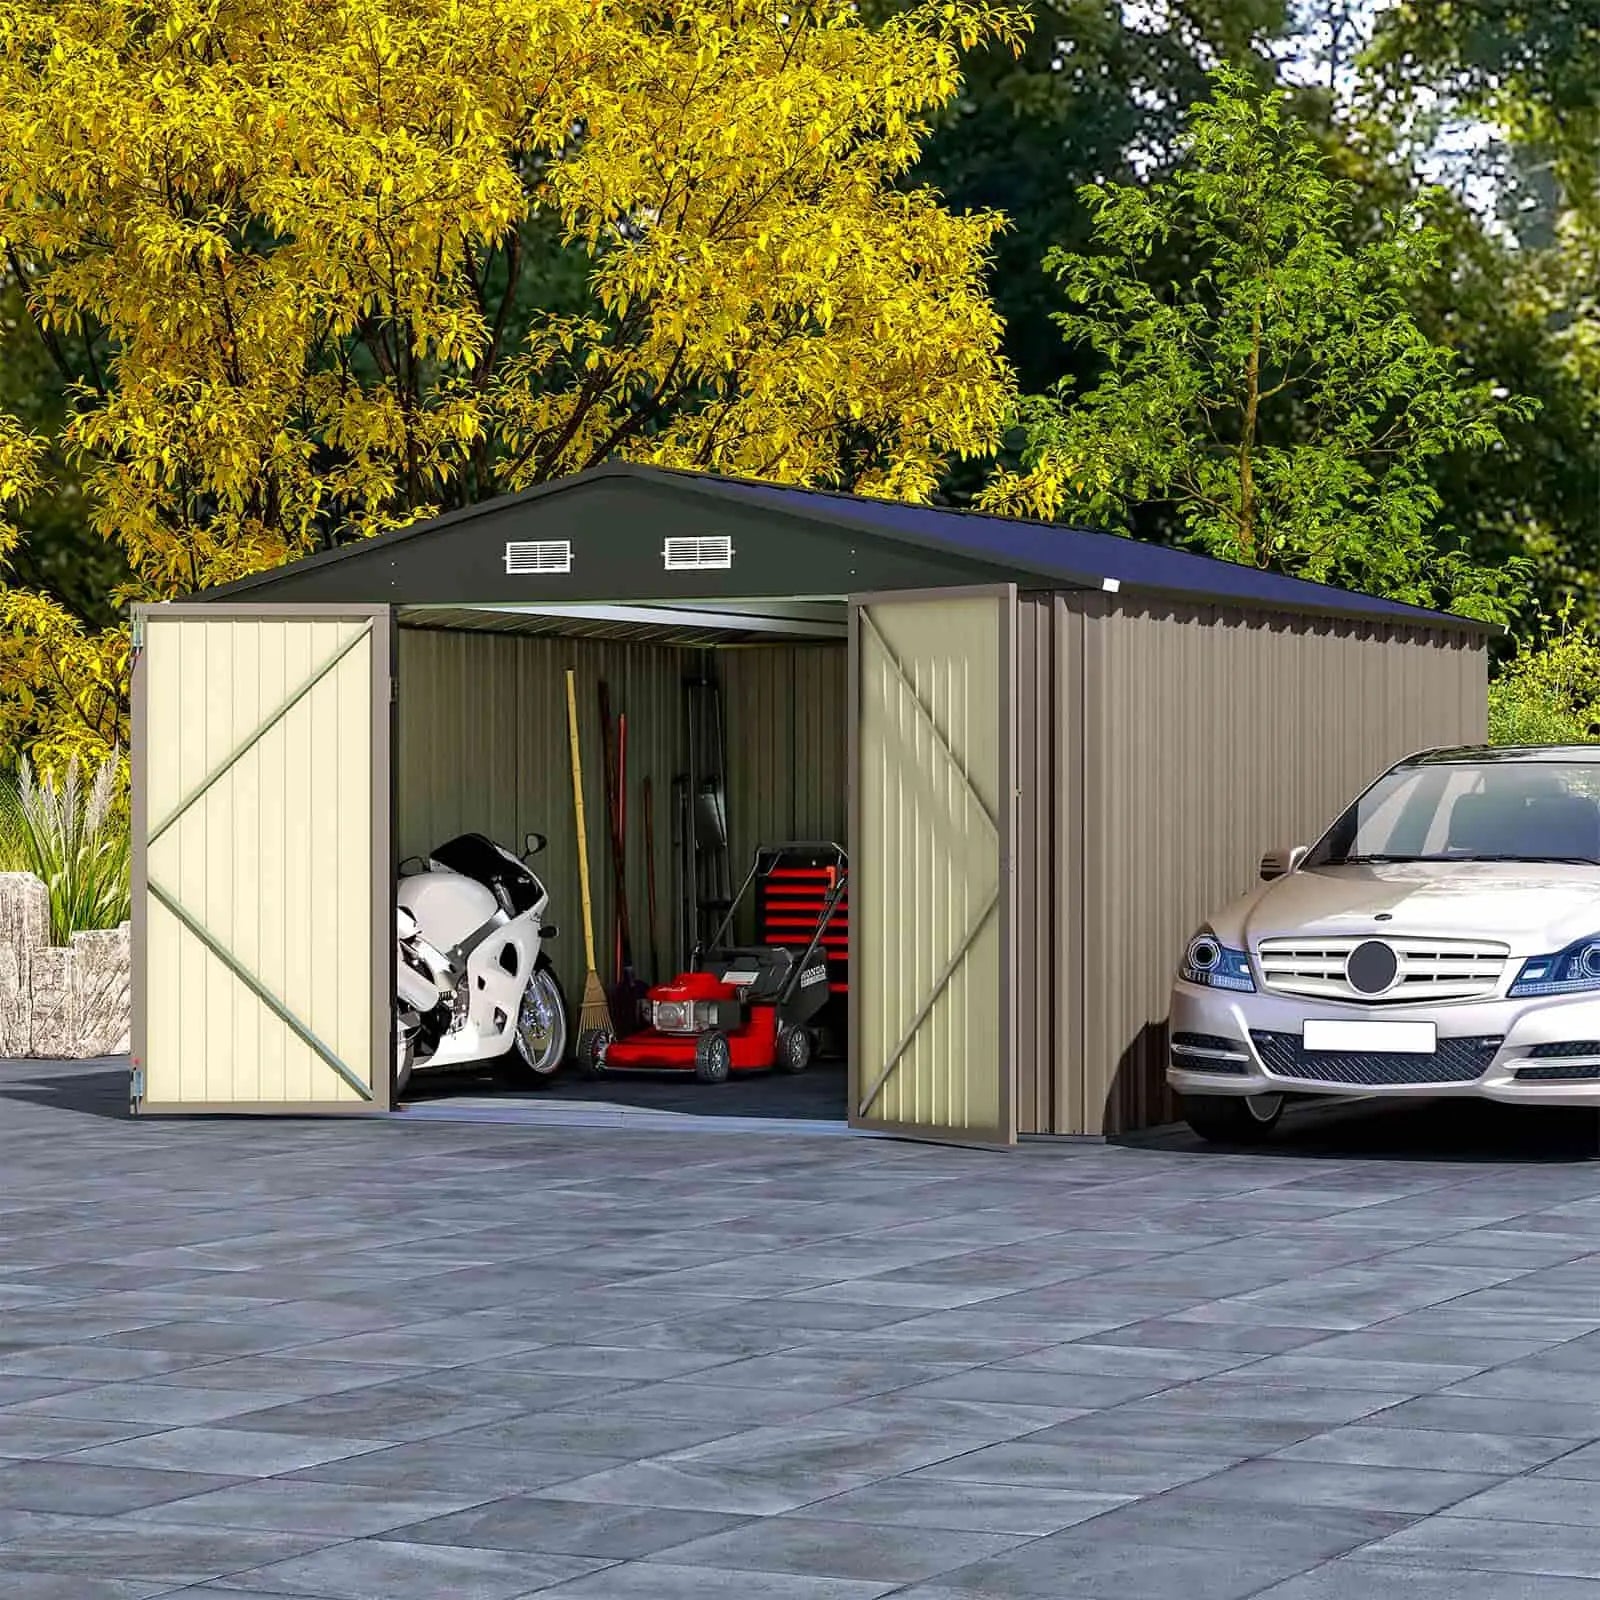 [Pre-order] Patiowell 10x12 Metal Shed Pro With Peak Roof